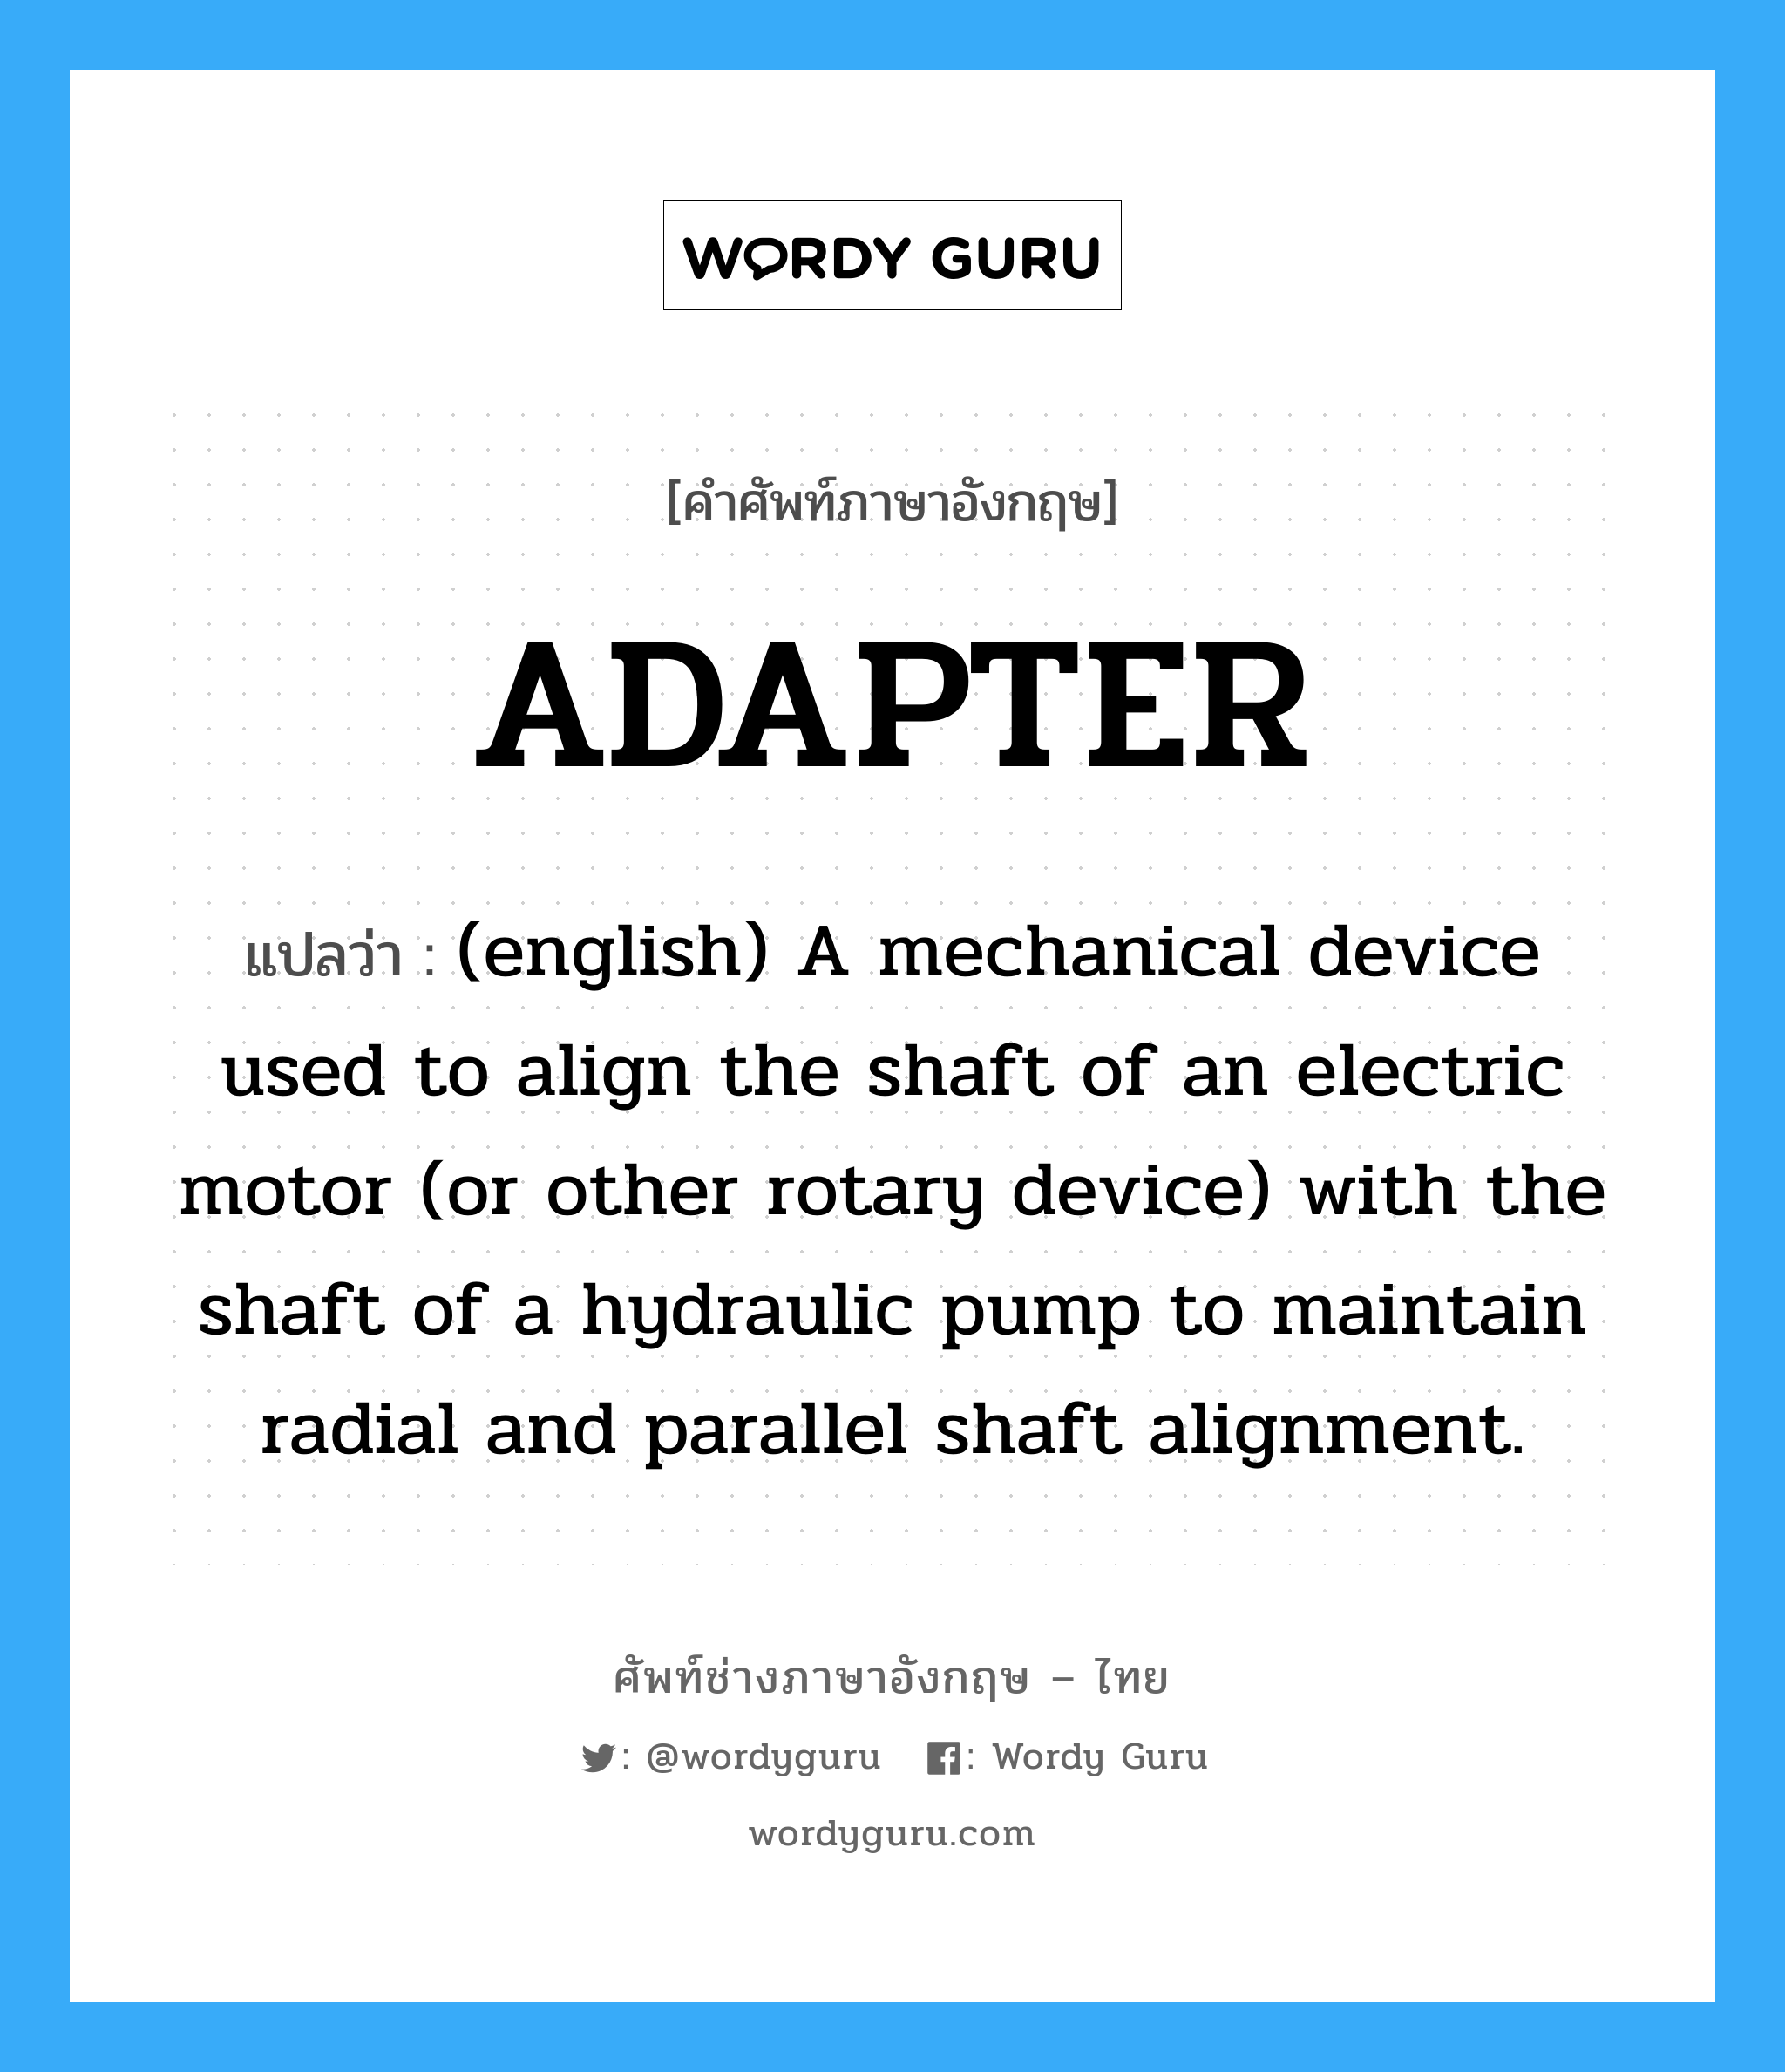 (english) A mechanical device used to align the shaft of an electric motor (or other rotary device) with the shaft of a hydraulic pump to maintain radial and parallel shaft alignment. ภาษาอังกฤษ?, คำศัพท์ช่างภาษาอังกฤษ - ไทย (english) A mechanical device used to align the shaft of an electric motor (or other rotary device) with the shaft of a hydraulic pump to maintain radial and parallel shaft alignment. คำศัพท์ภาษาอังกฤษ (english) A mechanical device used to align the shaft of an electric motor (or other rotary device) with the shaft of a hydraulic pump to maintain radial and parallel shaft alignment. แปลว่า ADAPTER